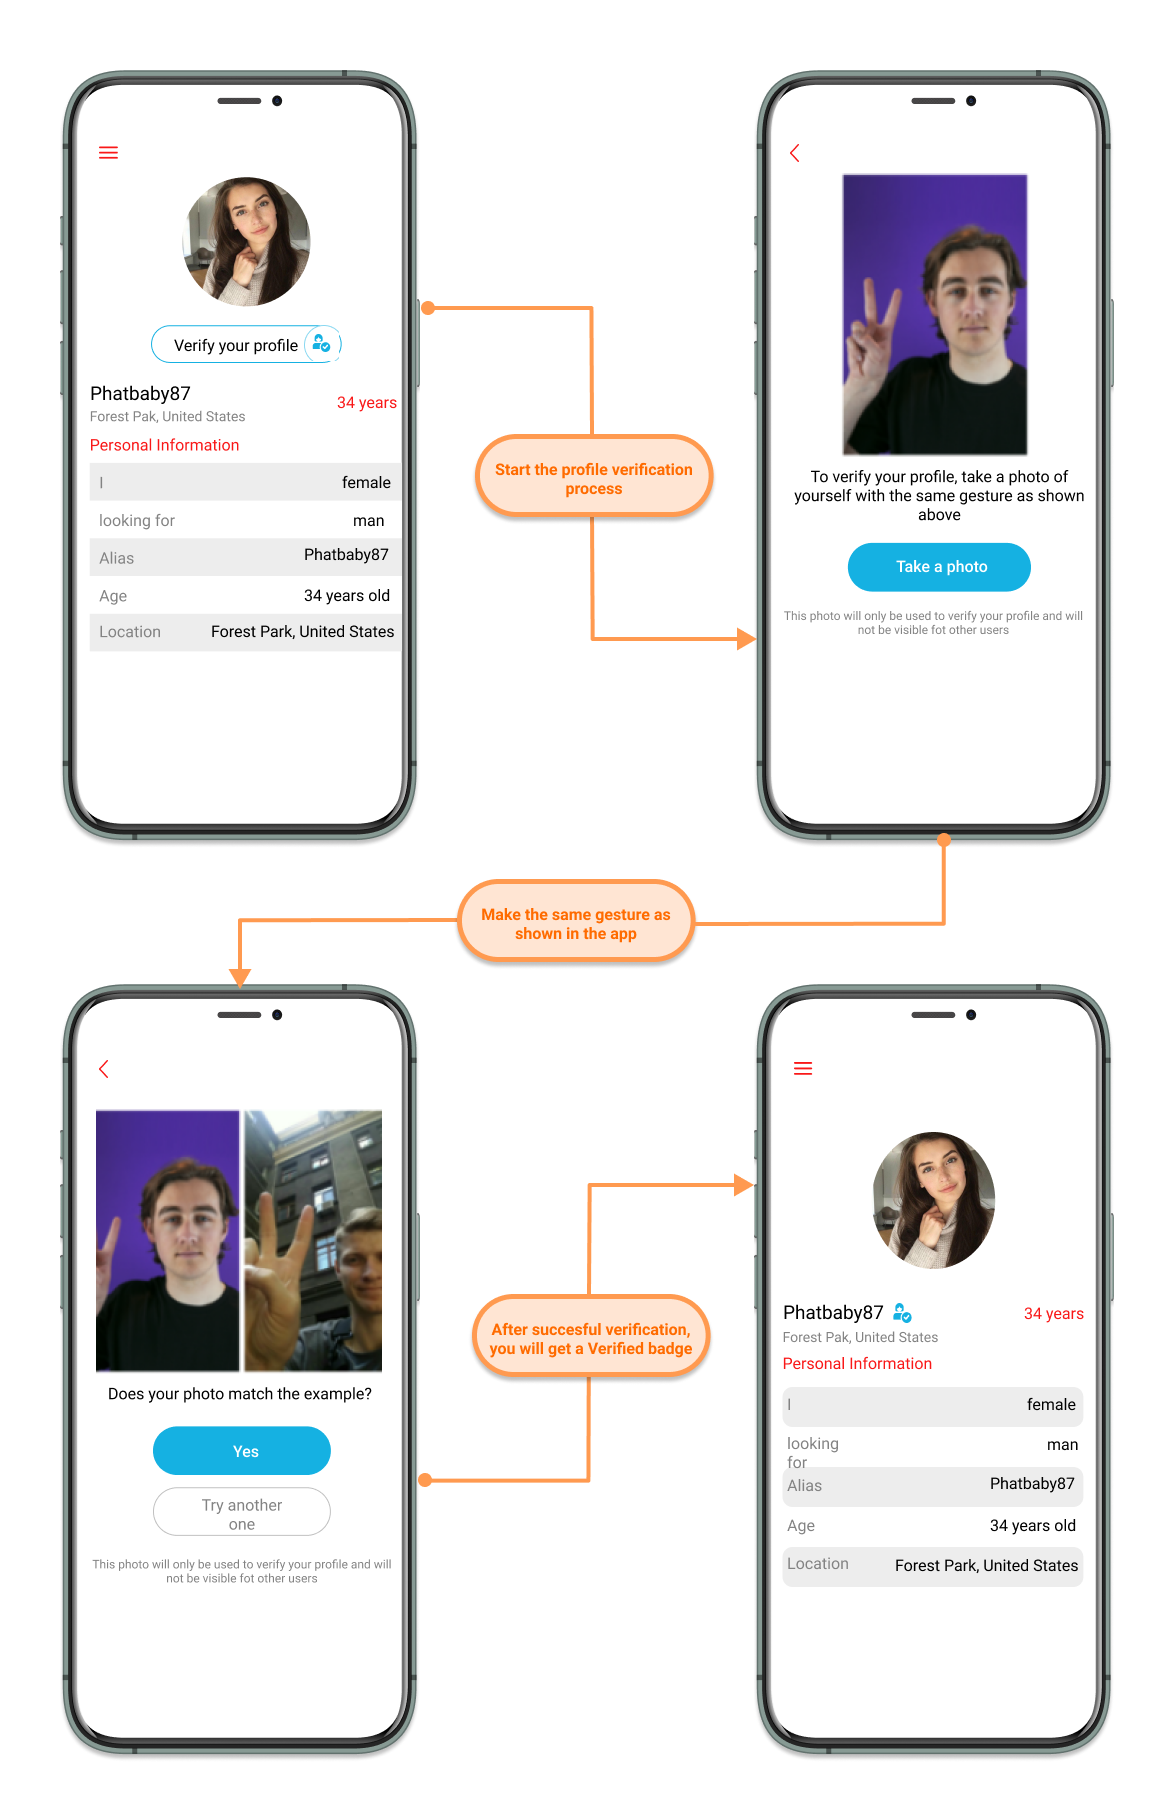 Users profile verification – Ask them to mimic a head gesture